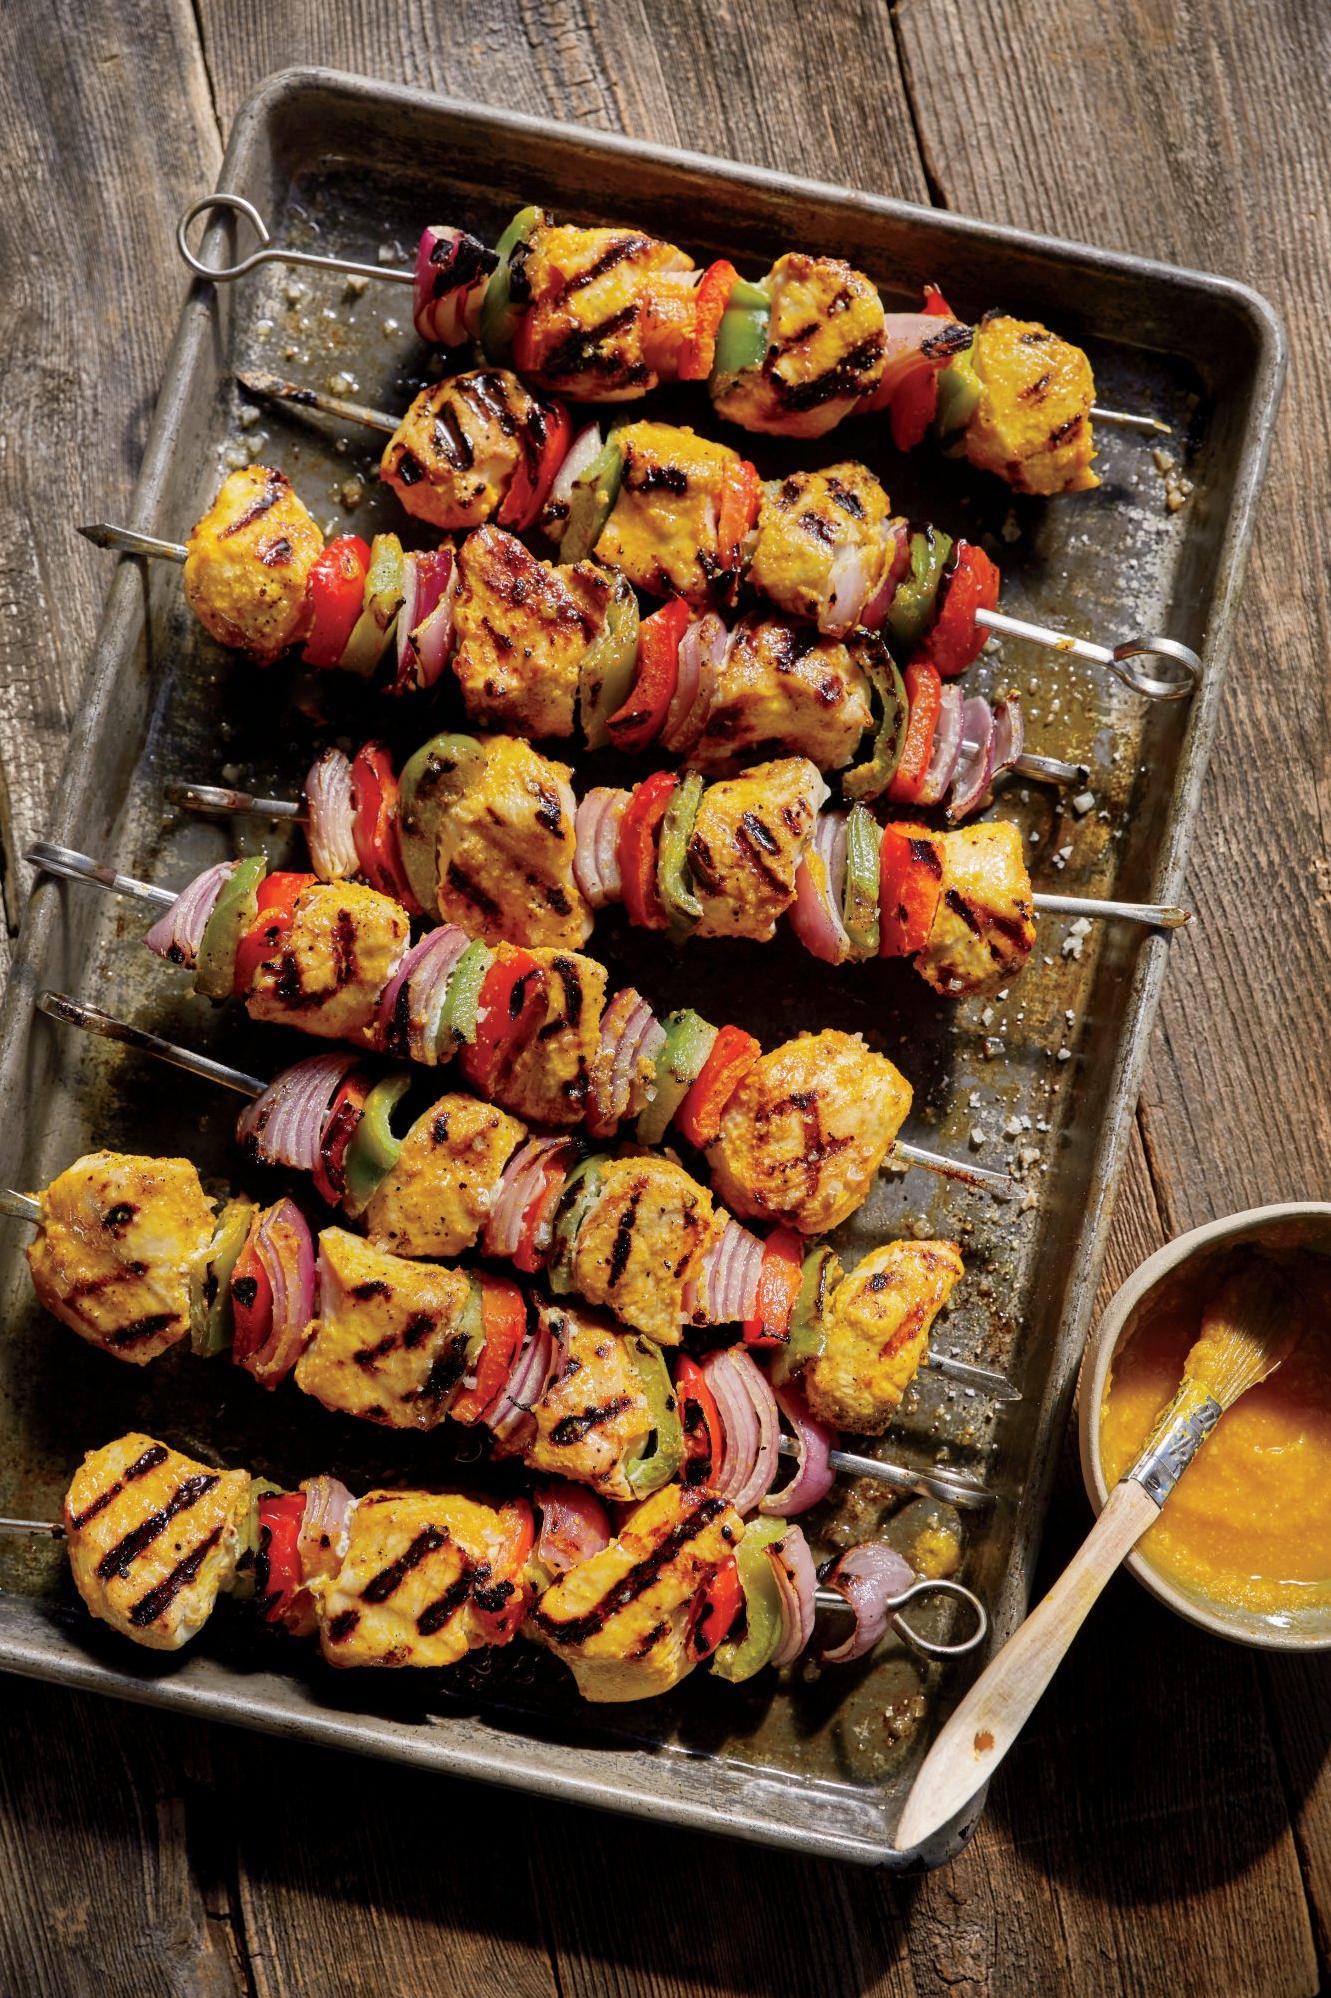  Spicy, tangy and smoky - these skewers are a taste explosion!